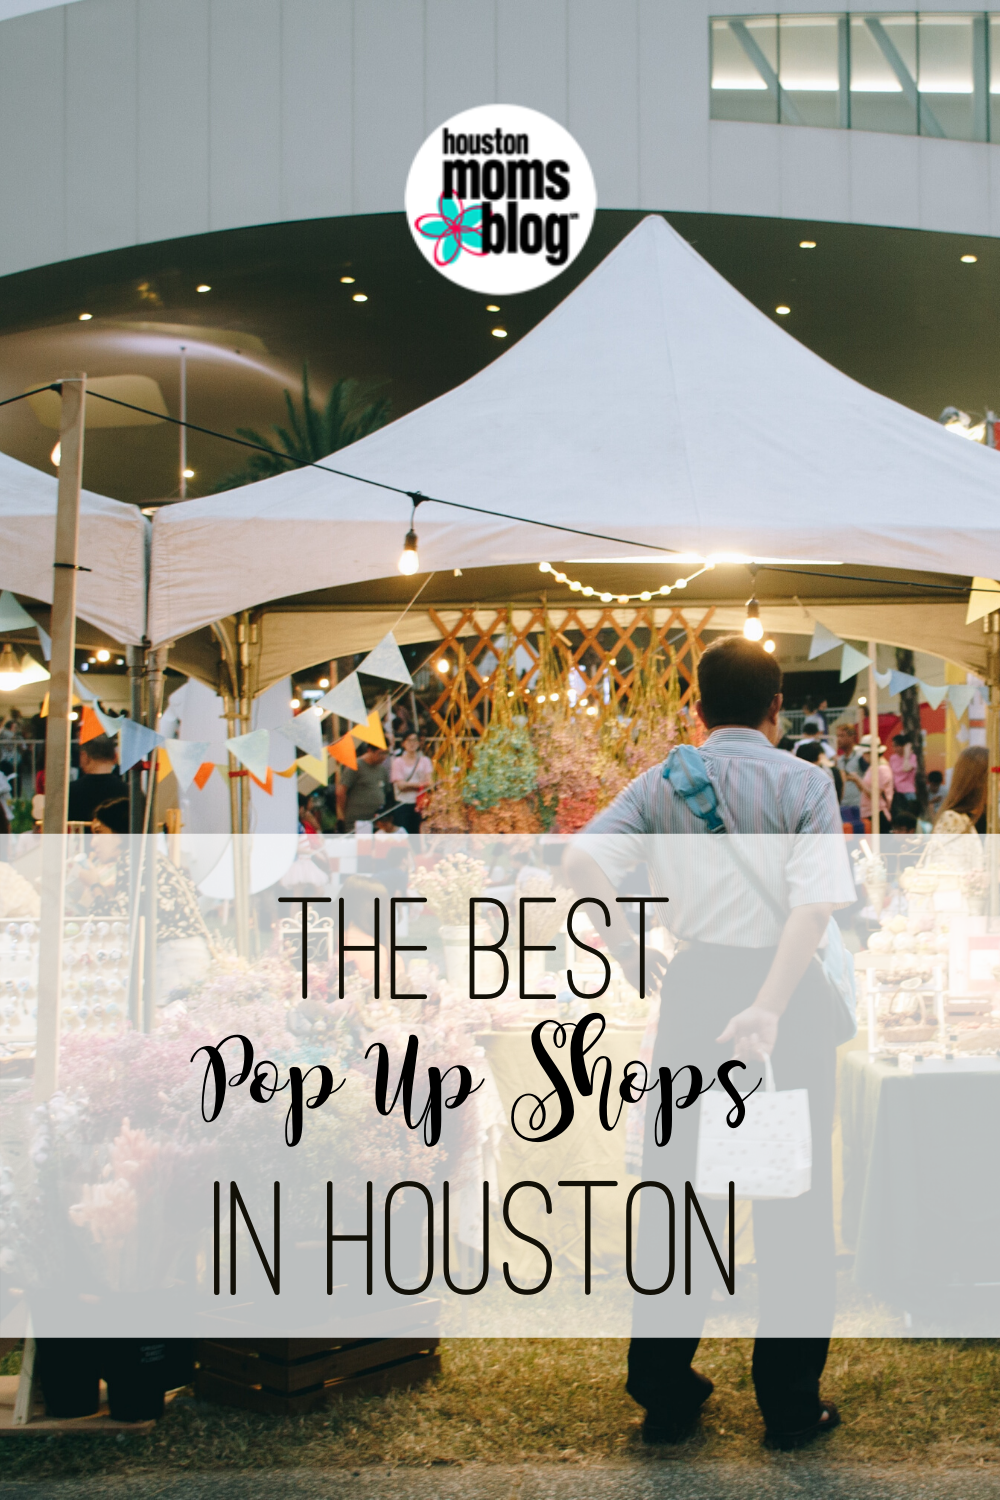 The Best Pop Up Shops in Houston. Logo: Houston moms blog. A photograph of brightly lit stalls under canopies at night. 